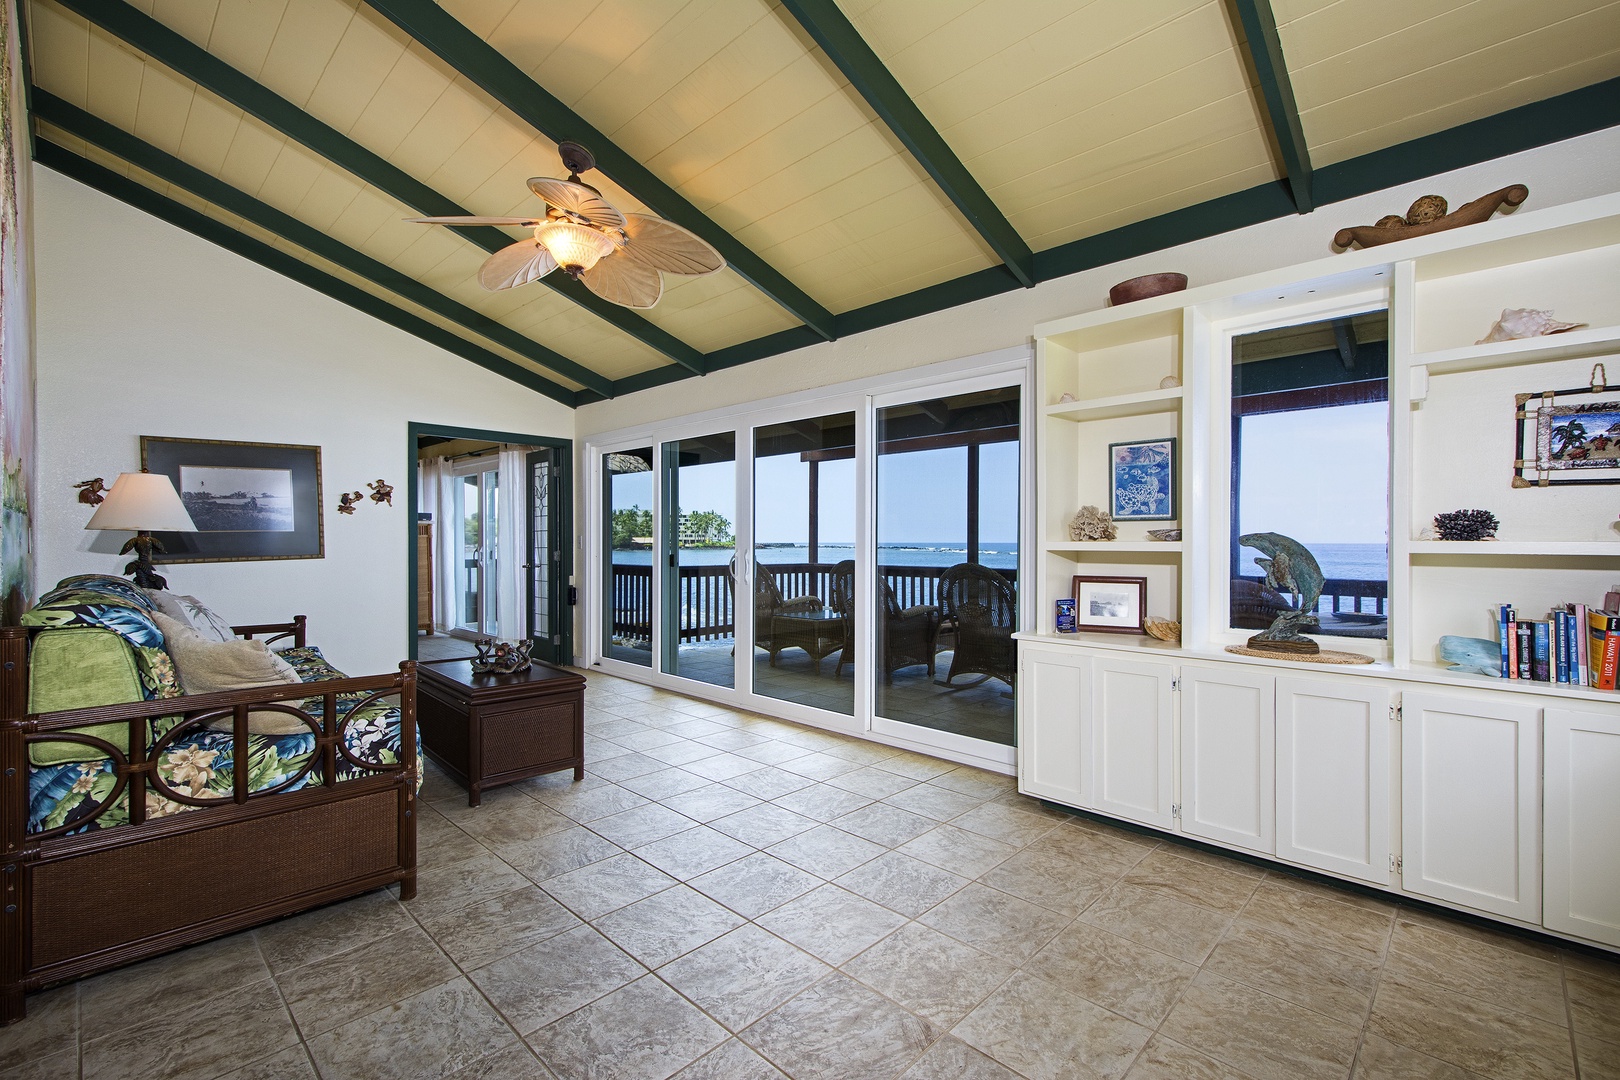 Kailua Kona Vacation Rentals, The Cottage - Living room looking out to waters edge featuring a trundle sleep